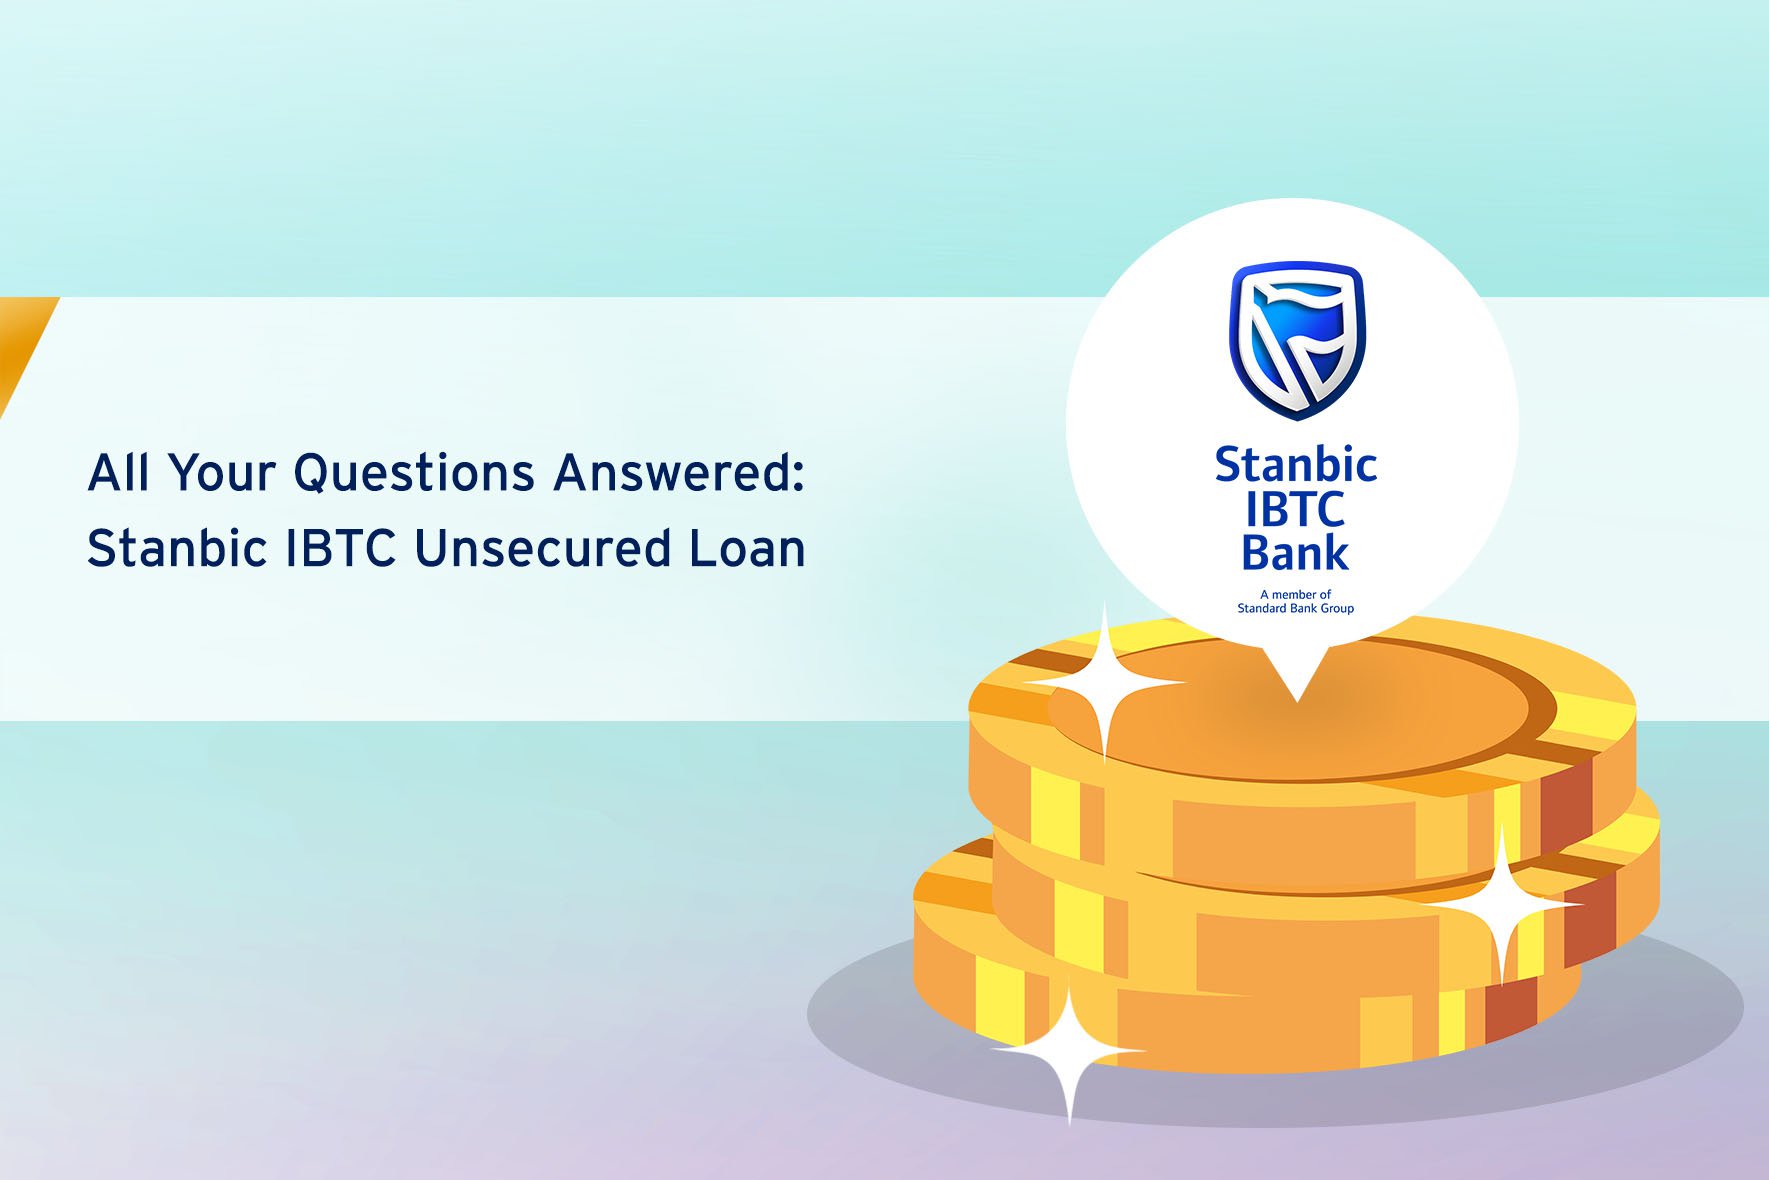 All Your Questions Answered - Stanbic IBTC Unsecured Loan cover